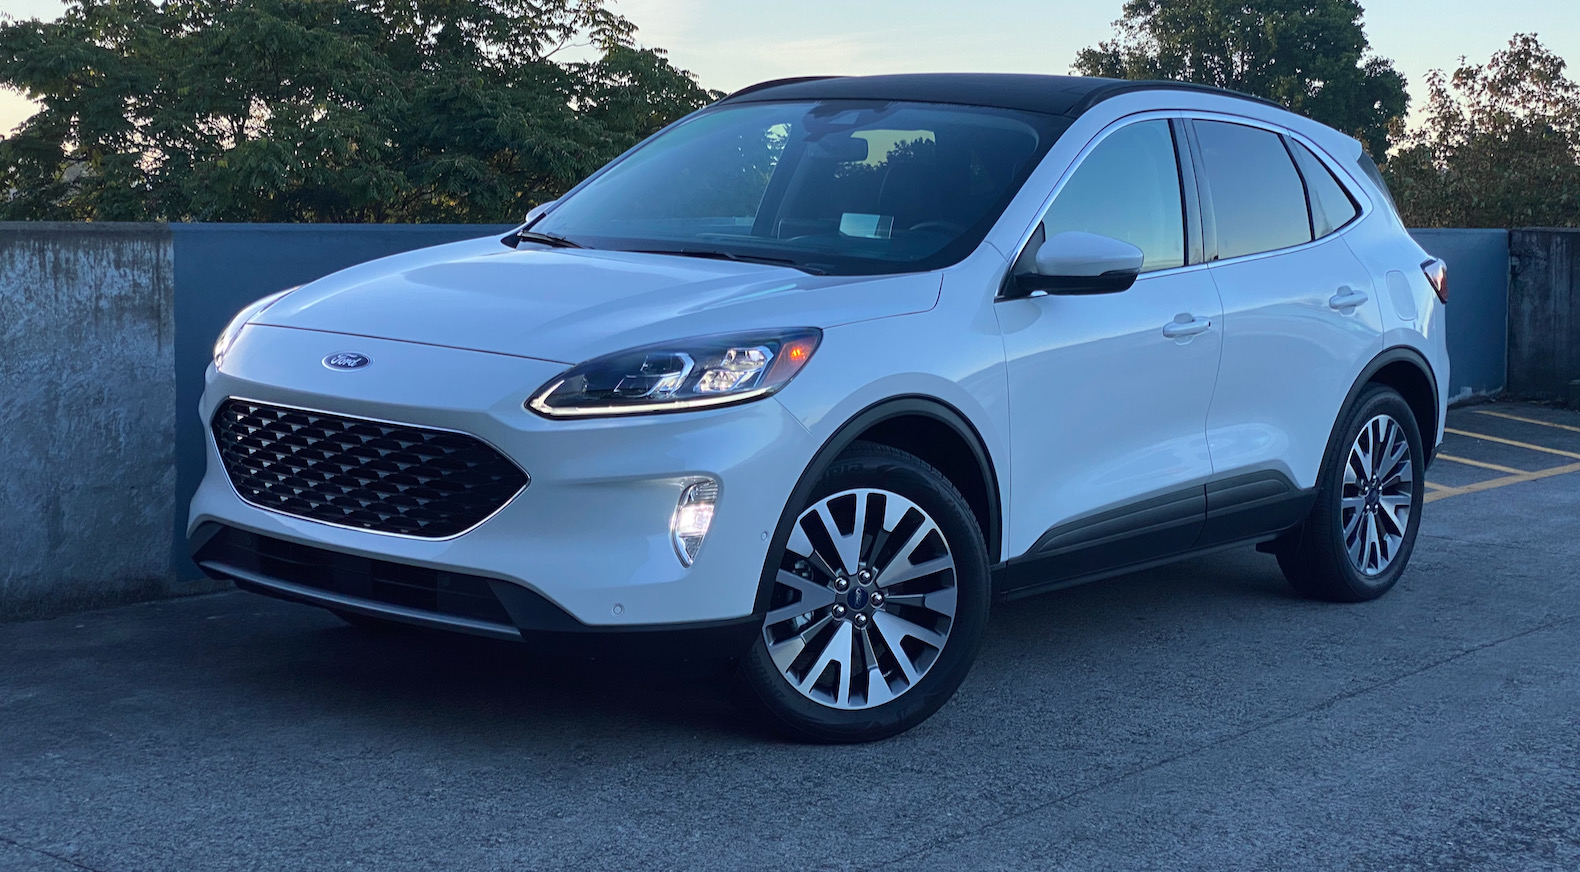 2020 Ford Escape Review: Fashionably grown up - The Torque Report